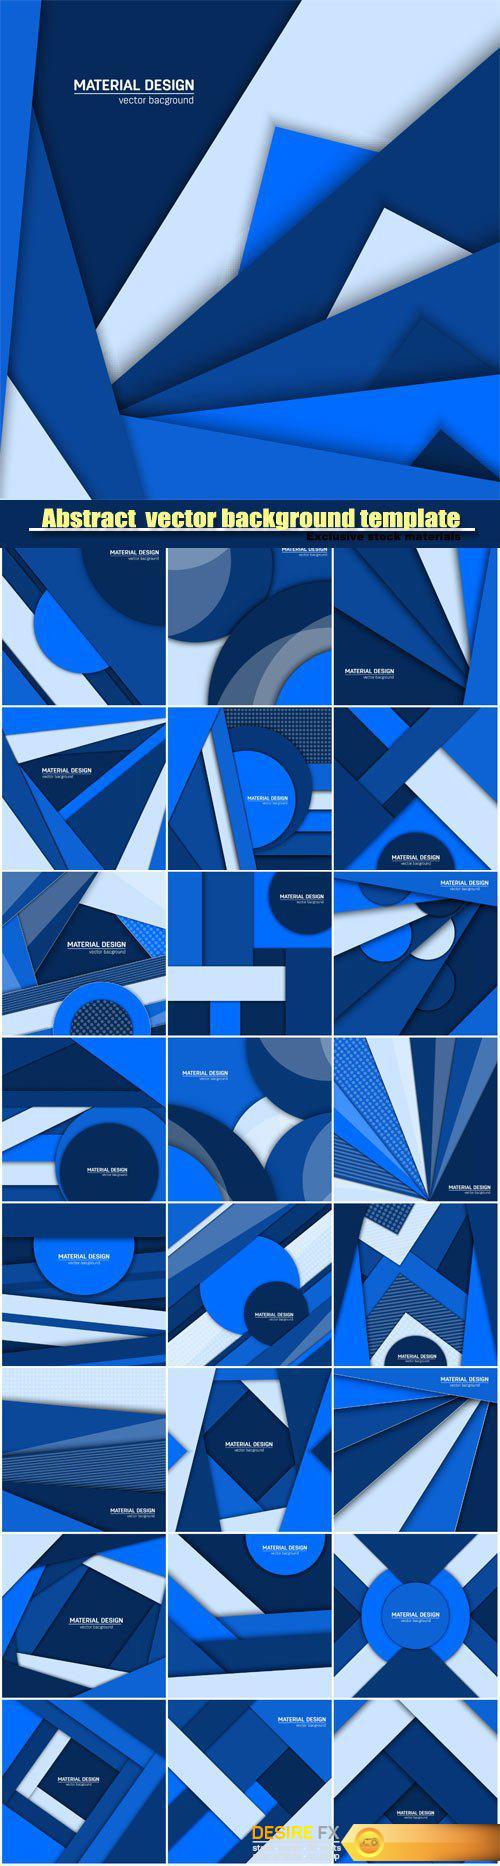 Abstract creative layout vector background template